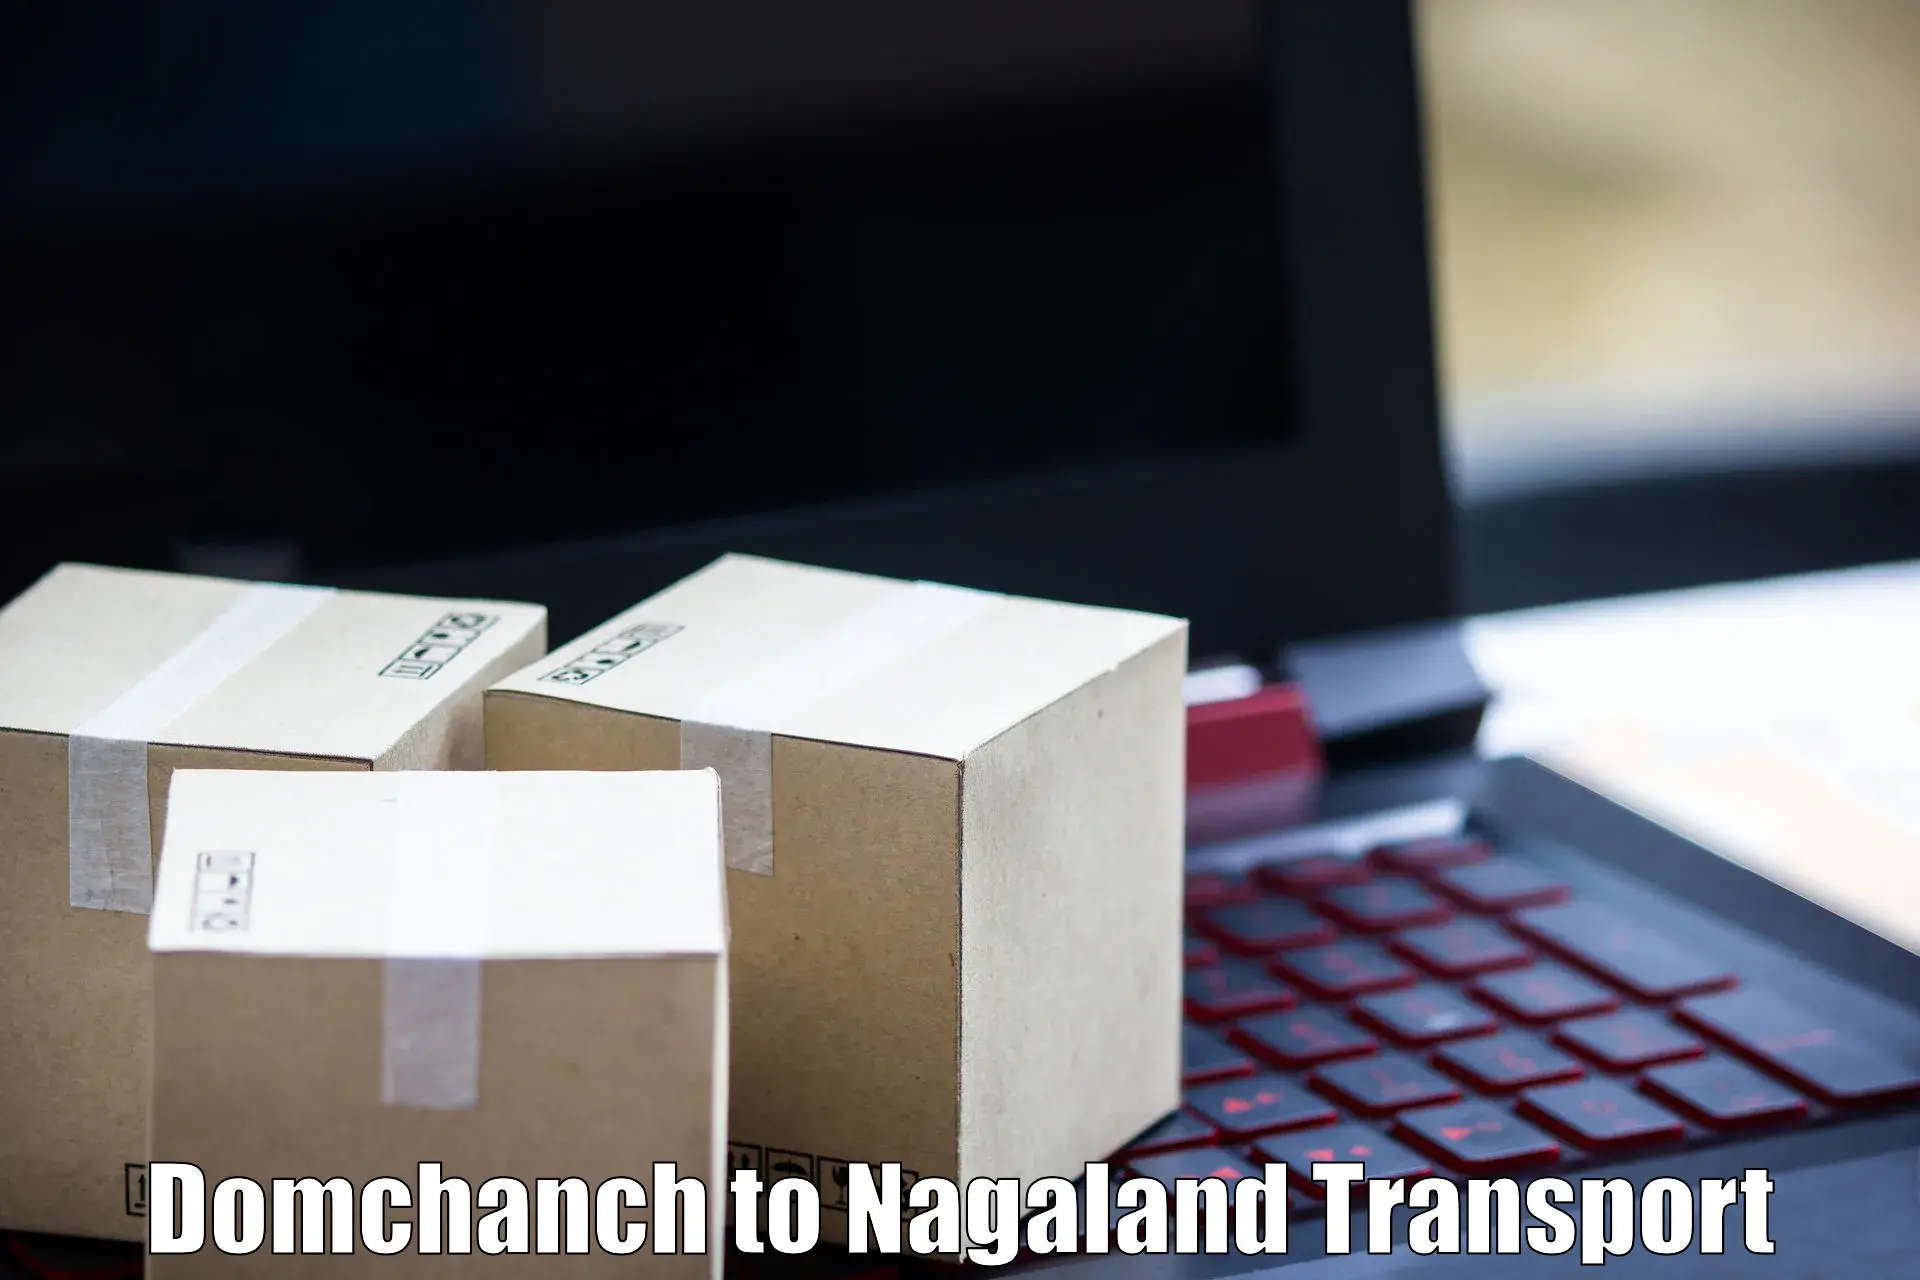 Container transport service Domchanch to Tuensang